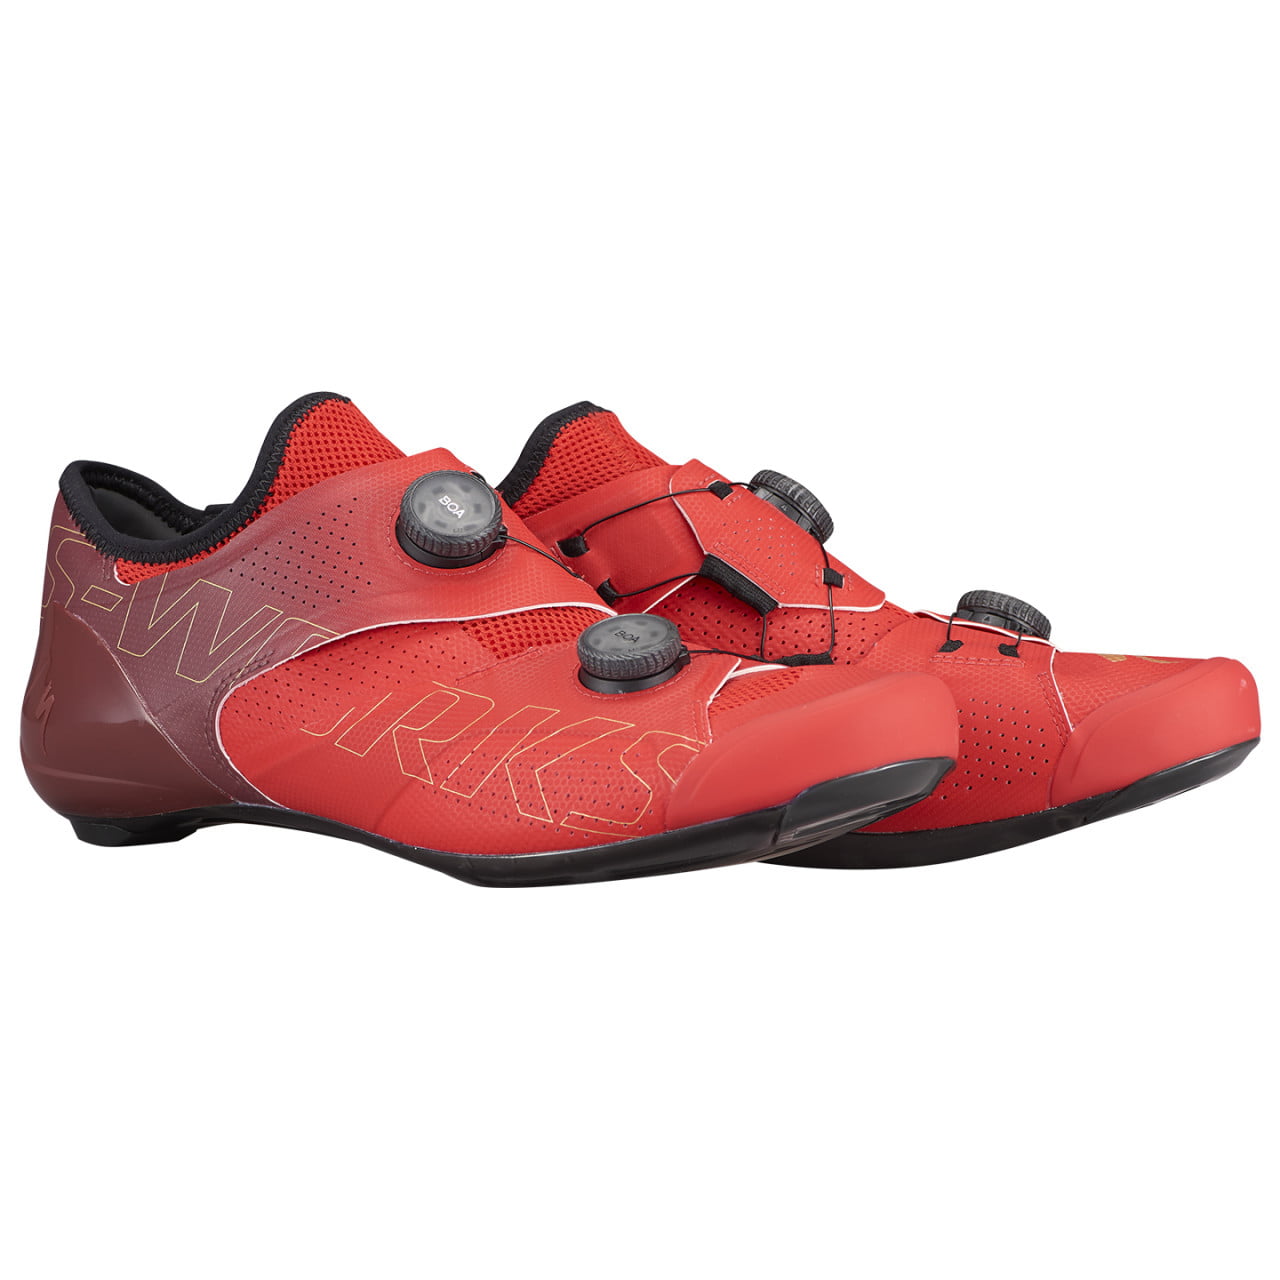 S-Works Ares Road Bike Shoes